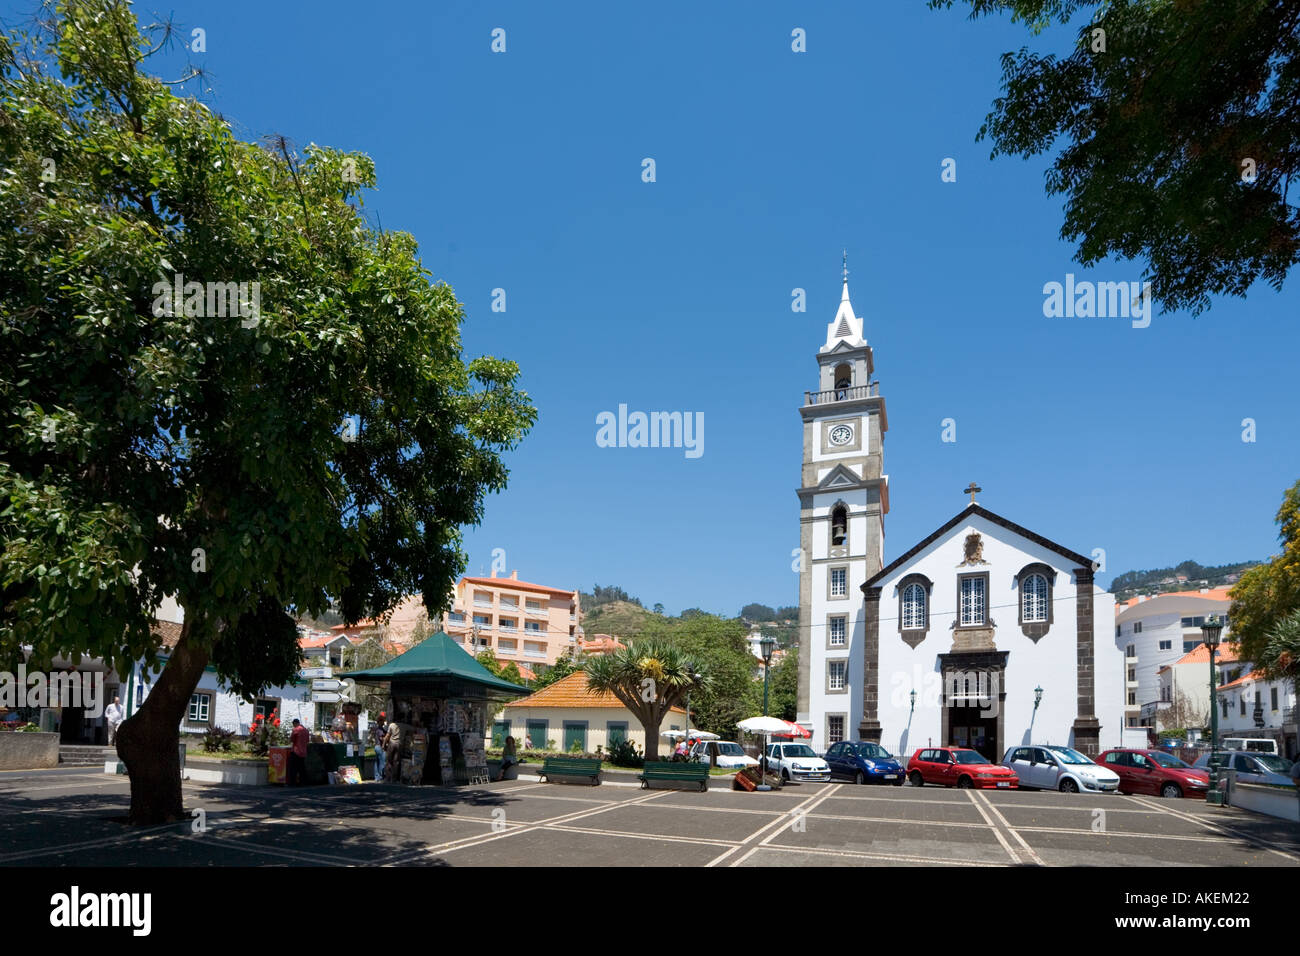 Church in the Main Square, Canico, Madeira, Portugal Stock Photo